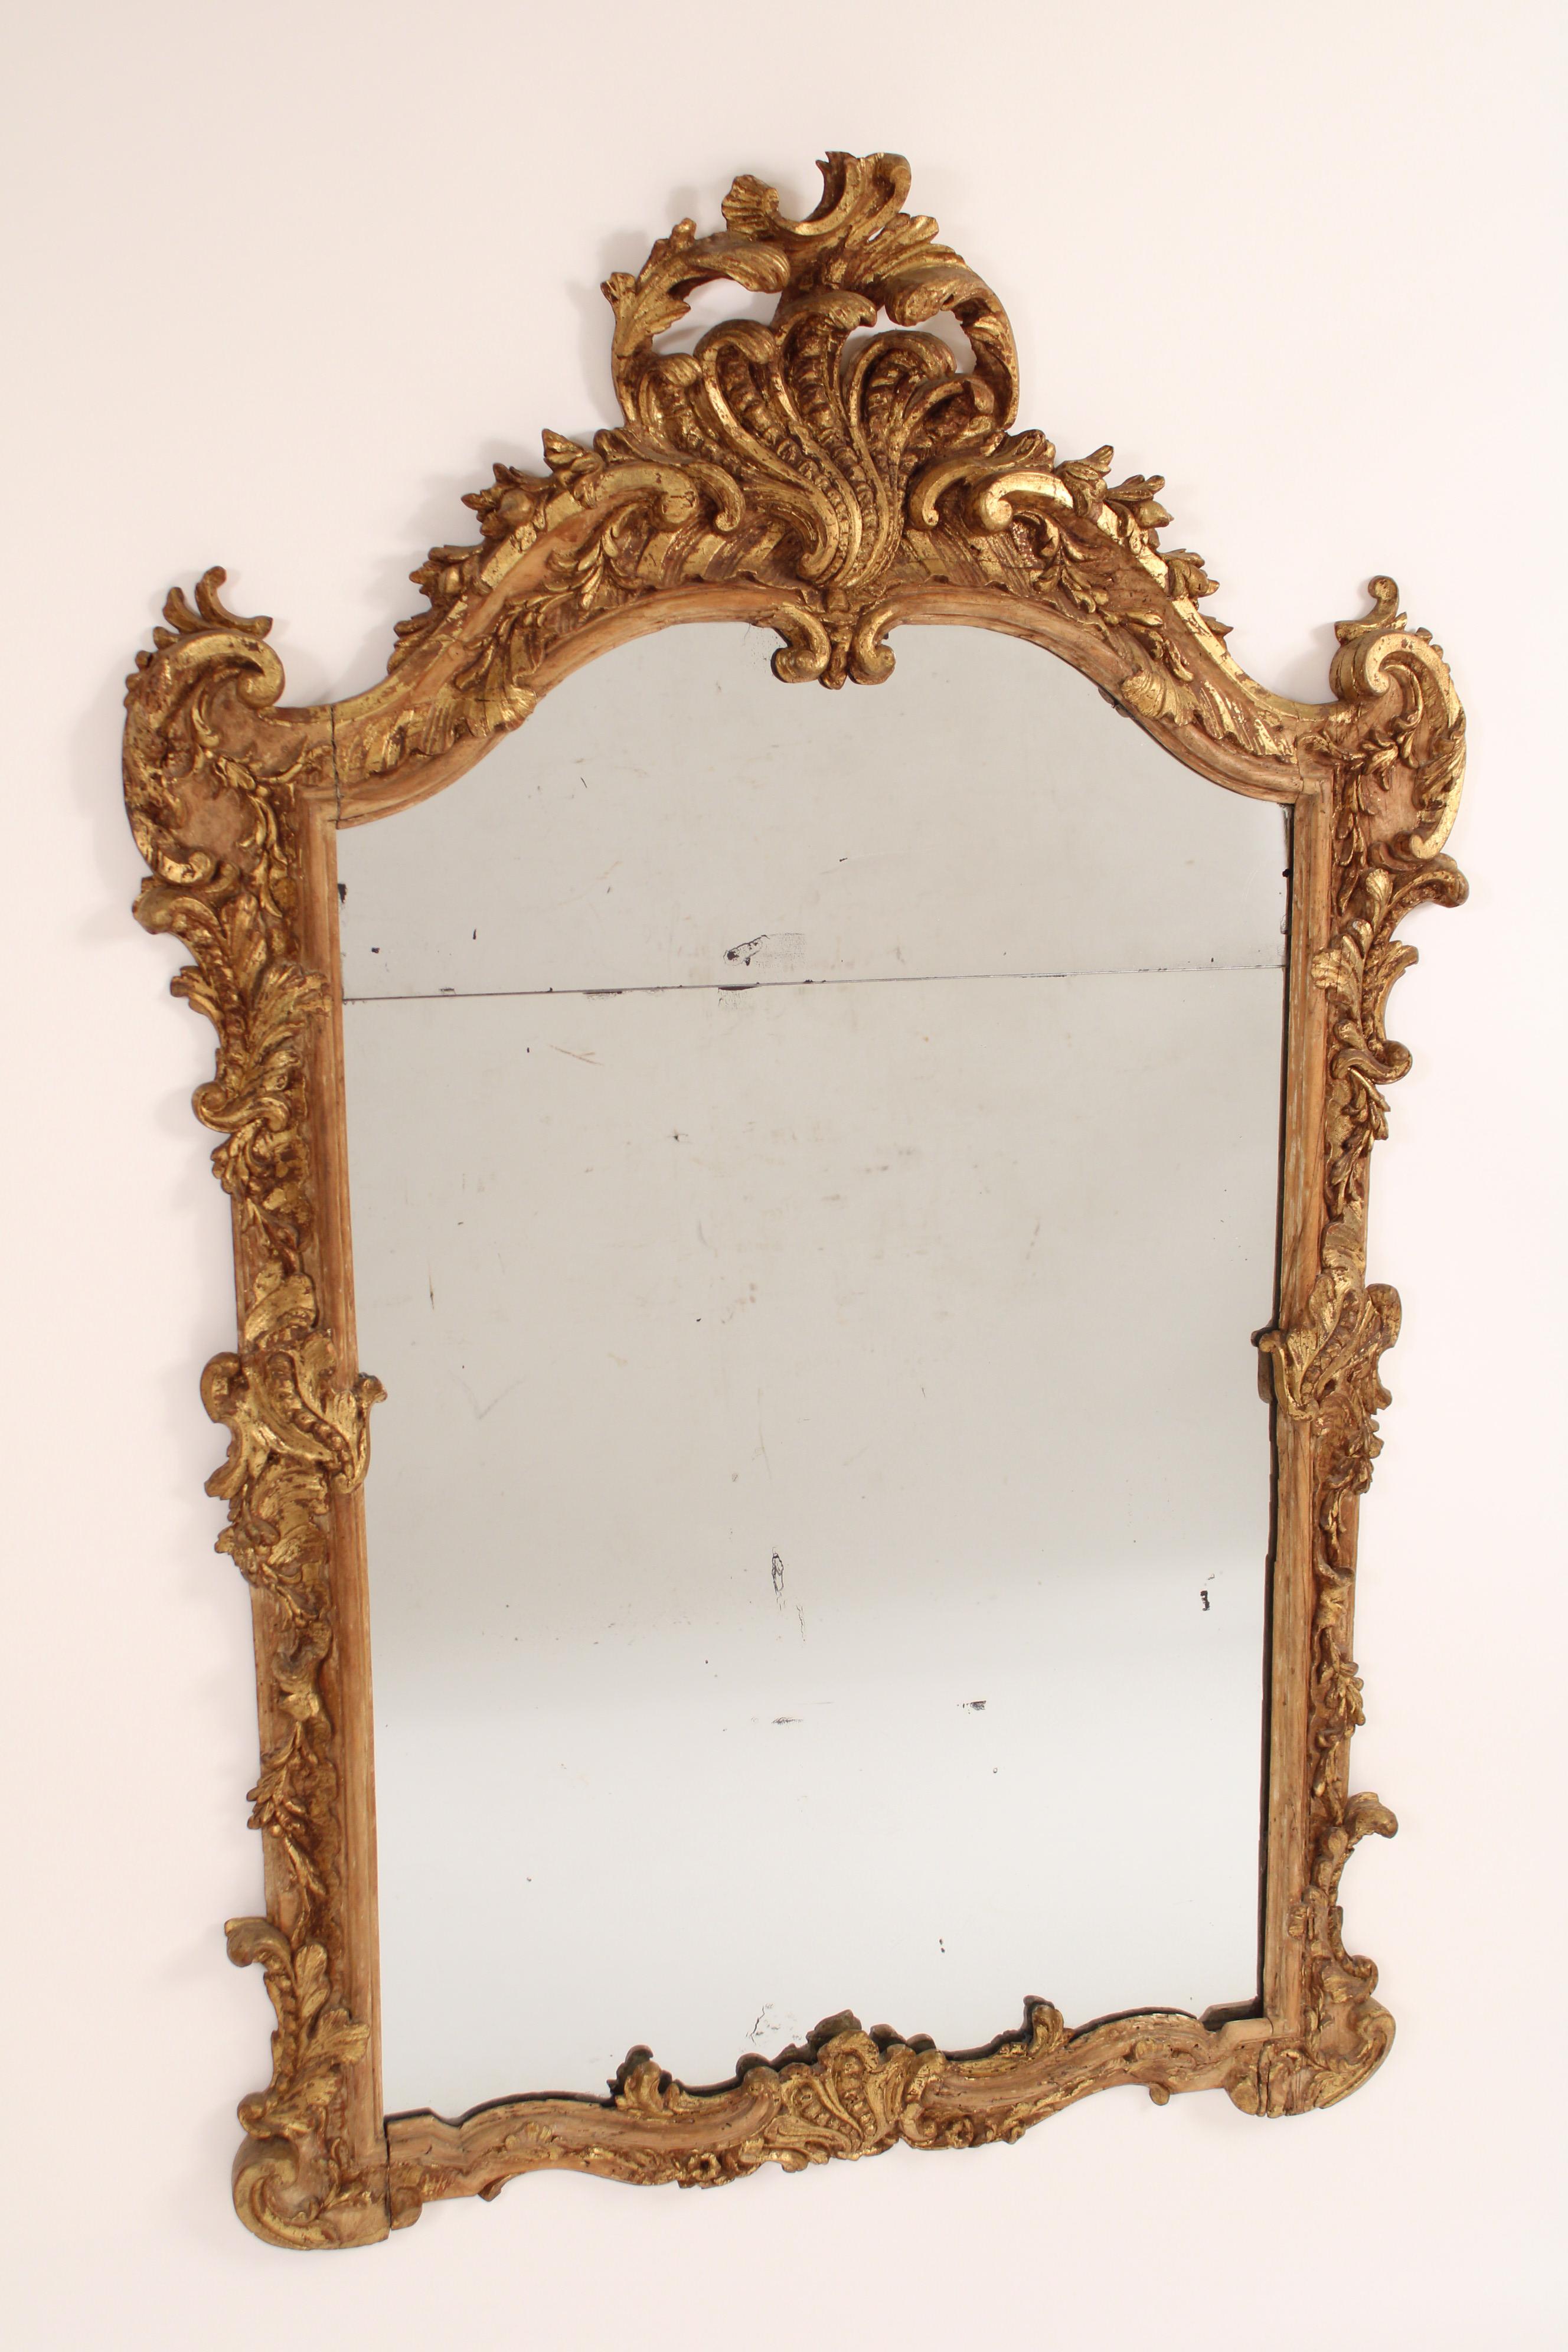 Antique Louis XV style gilt wood mirror, 19th century. With a shell and foliate carved pediment, leaf carved sides, leaf and shell carved base of mirror. A substantial amount of the gilding is missing. This mirror is very heavy. A professional needs